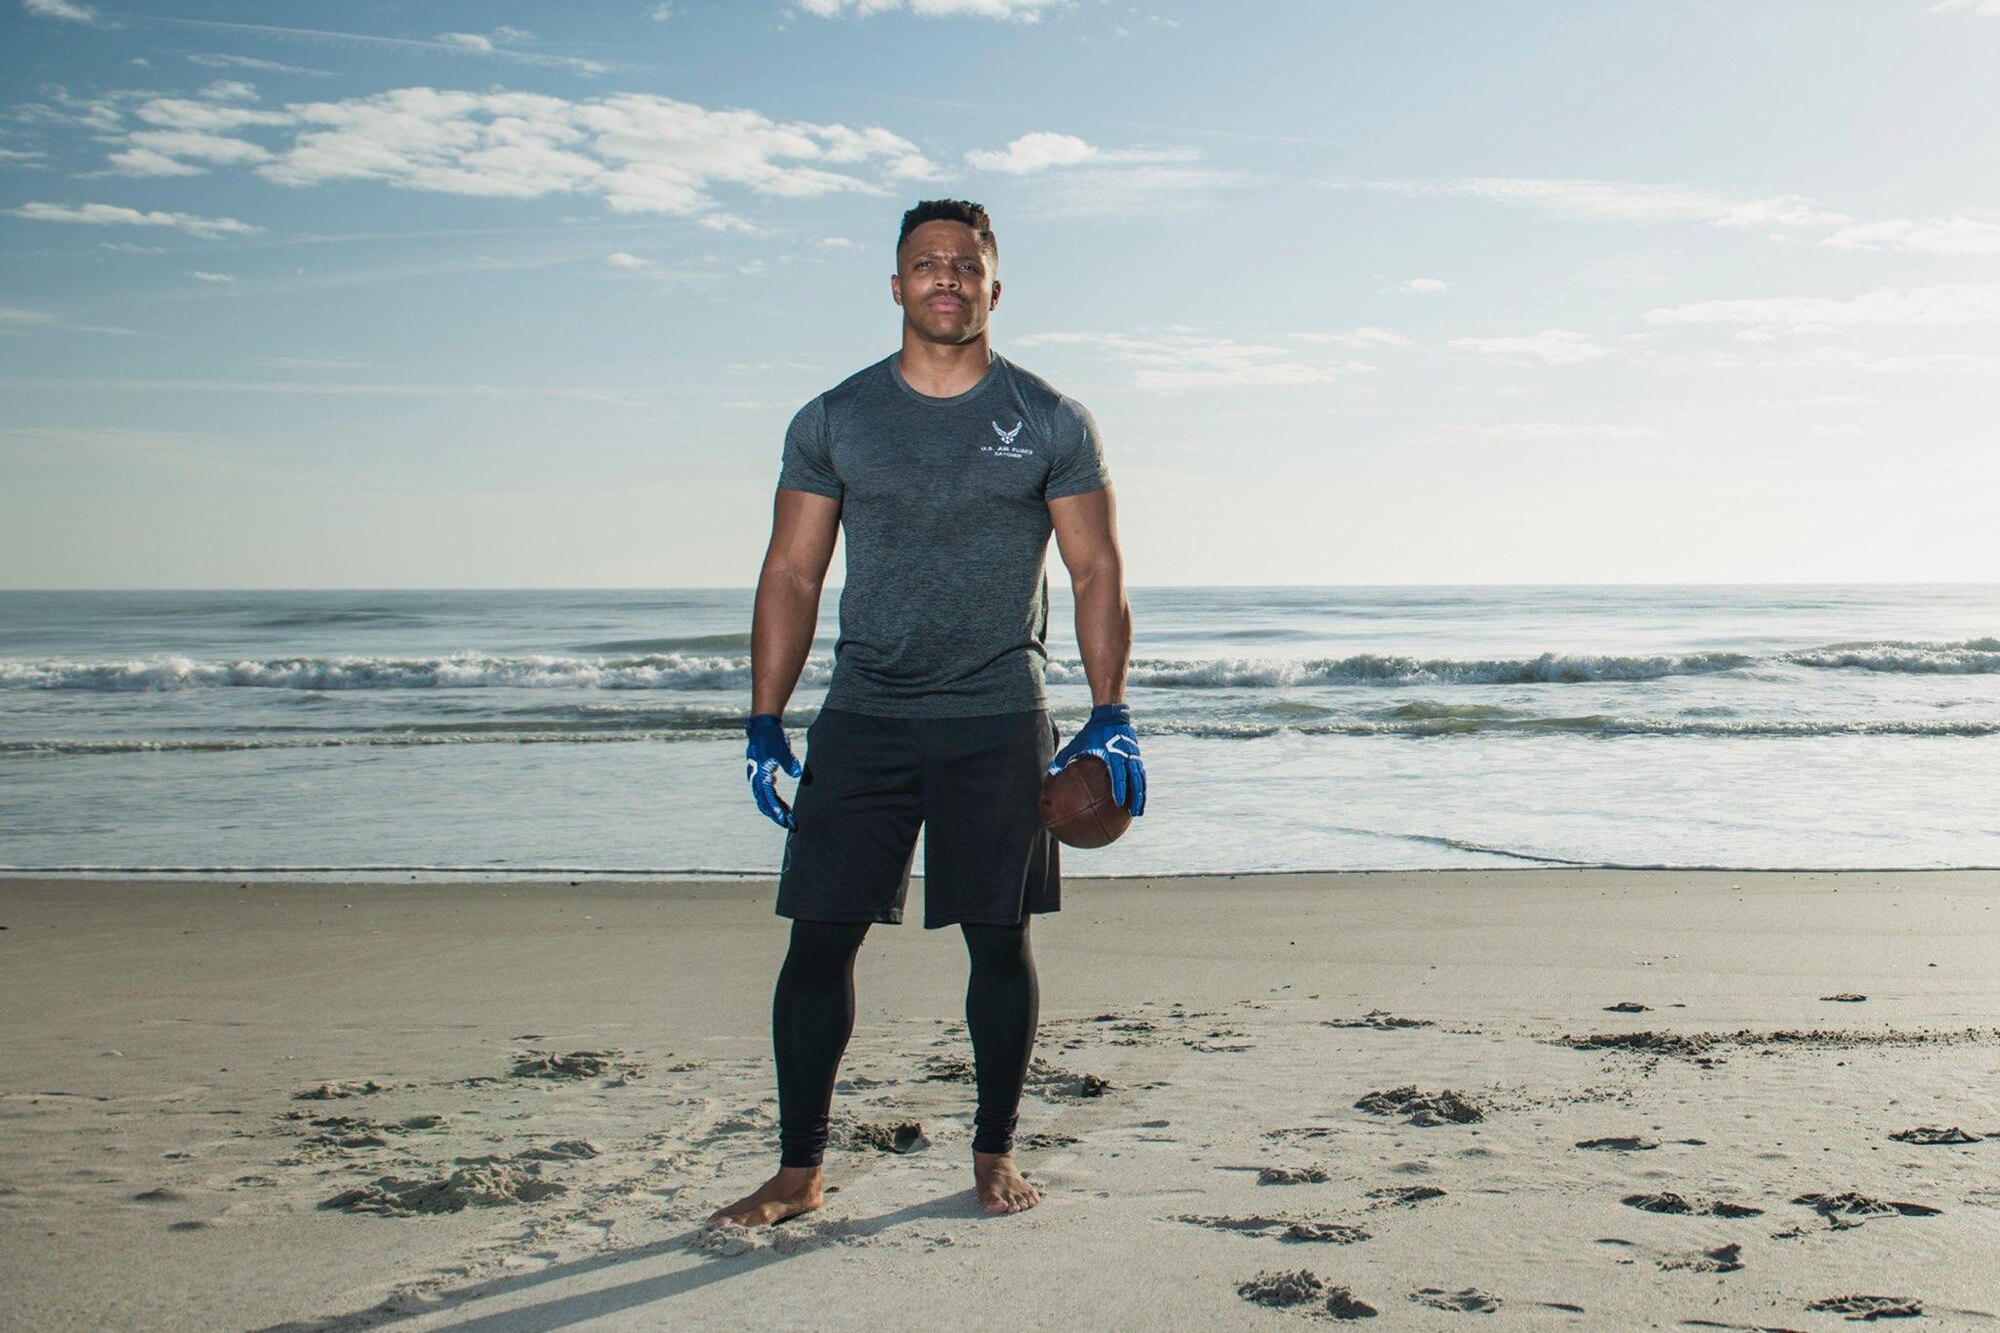 Staff Sgt. Geremy Satcher, a meteorologist and data analyst at the Air Force Technical Applications Center at Patrick Air Force Base, Florida, poses on the beach in Cocoa Beach prior to attending American National Combines in his pursuit of being picked up by a National Football League team.